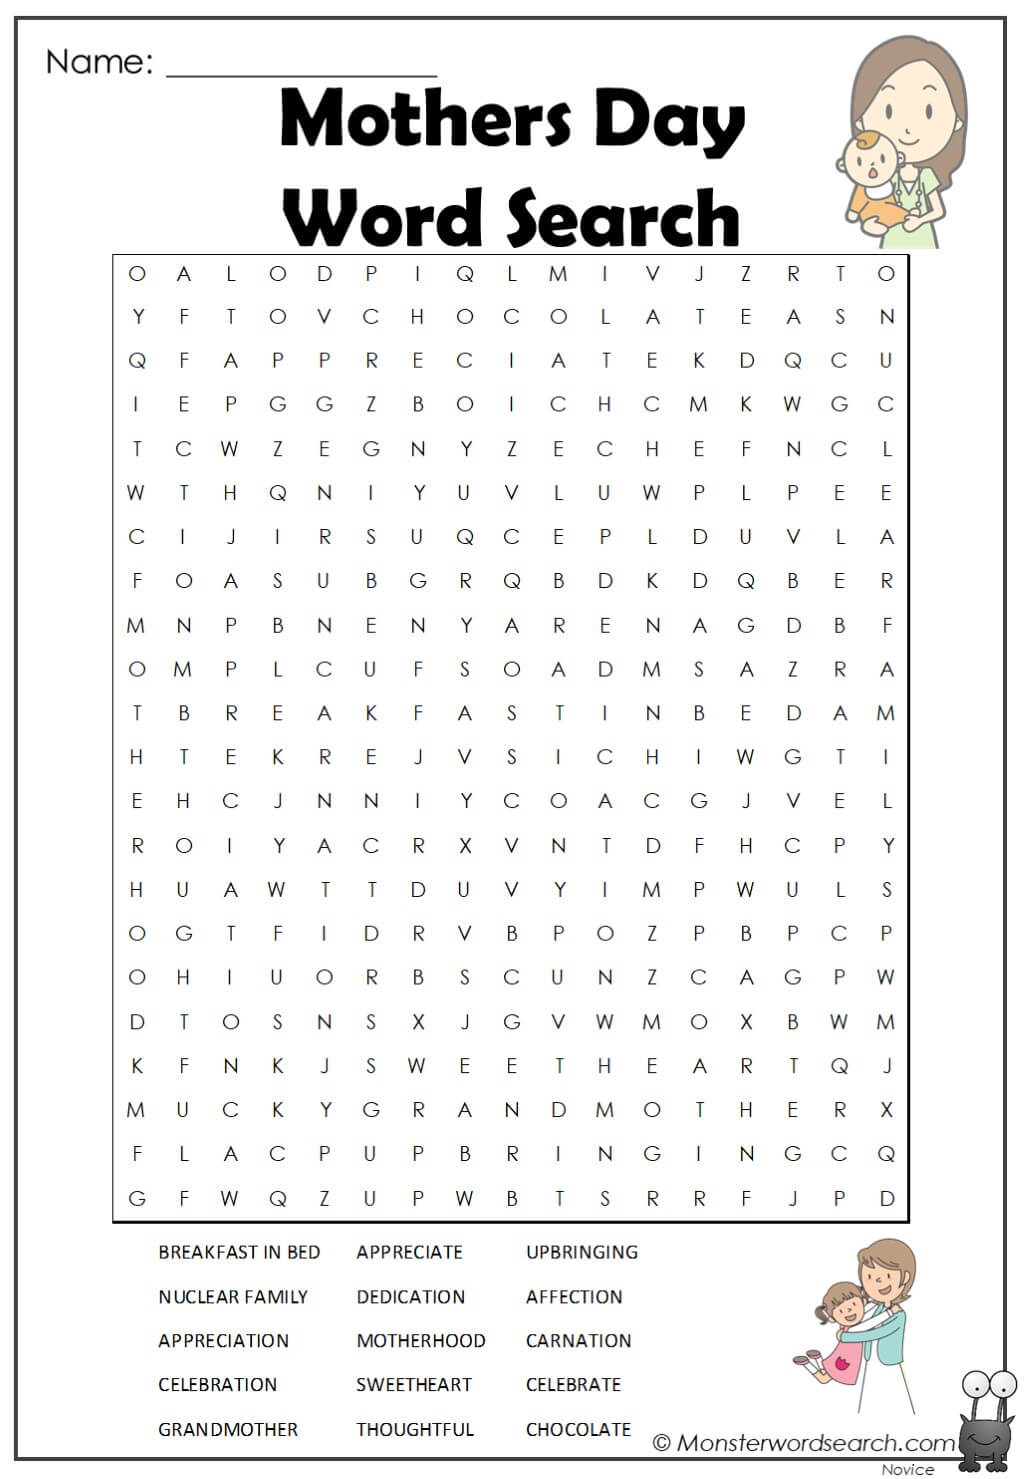 mothers-day-word-search-monster-word-search